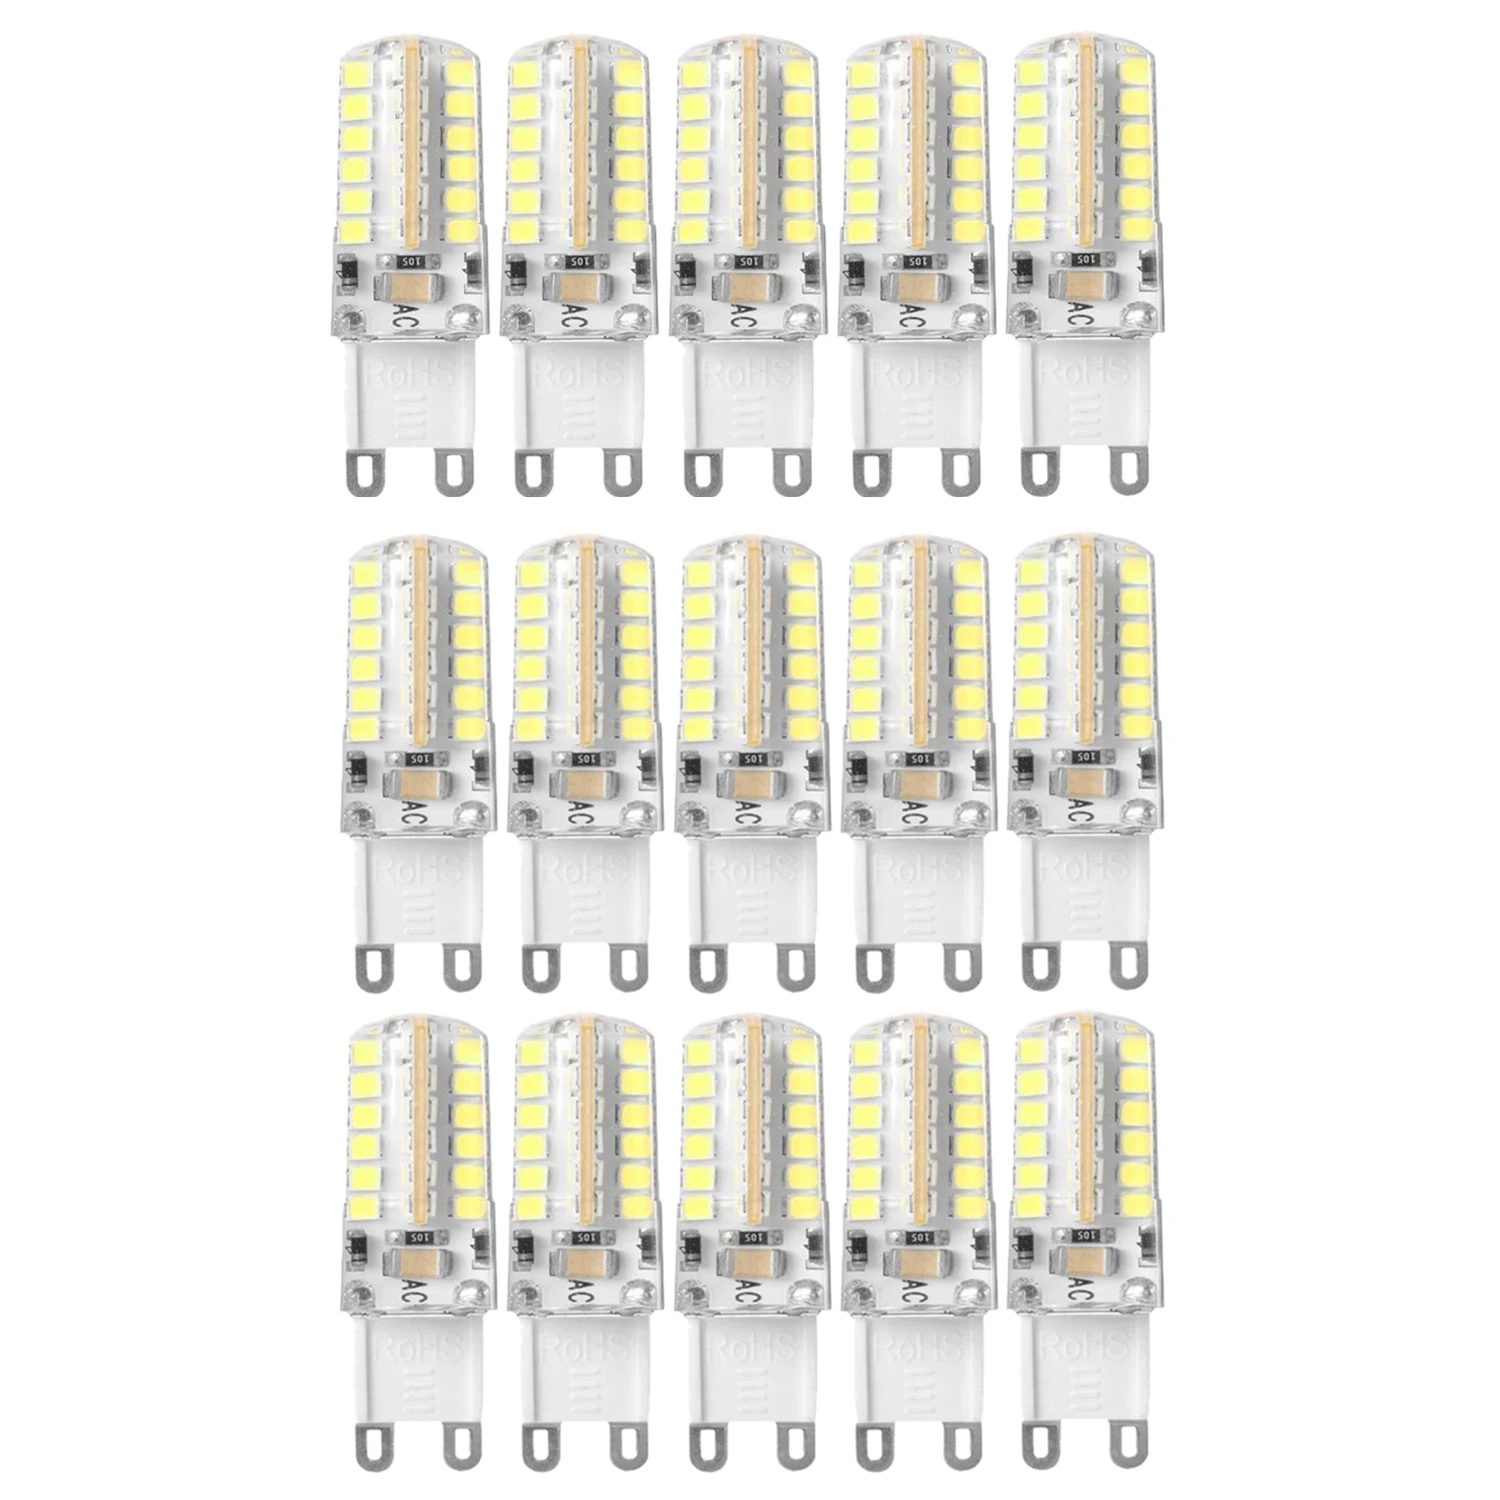 

New 5X G9 Led 2835 48SMD Capsule Bulb Light Bulb Lamps Replace Halogen 200-240V Main Colour:Cool White Wattage:G9 4W(2835 Chips)